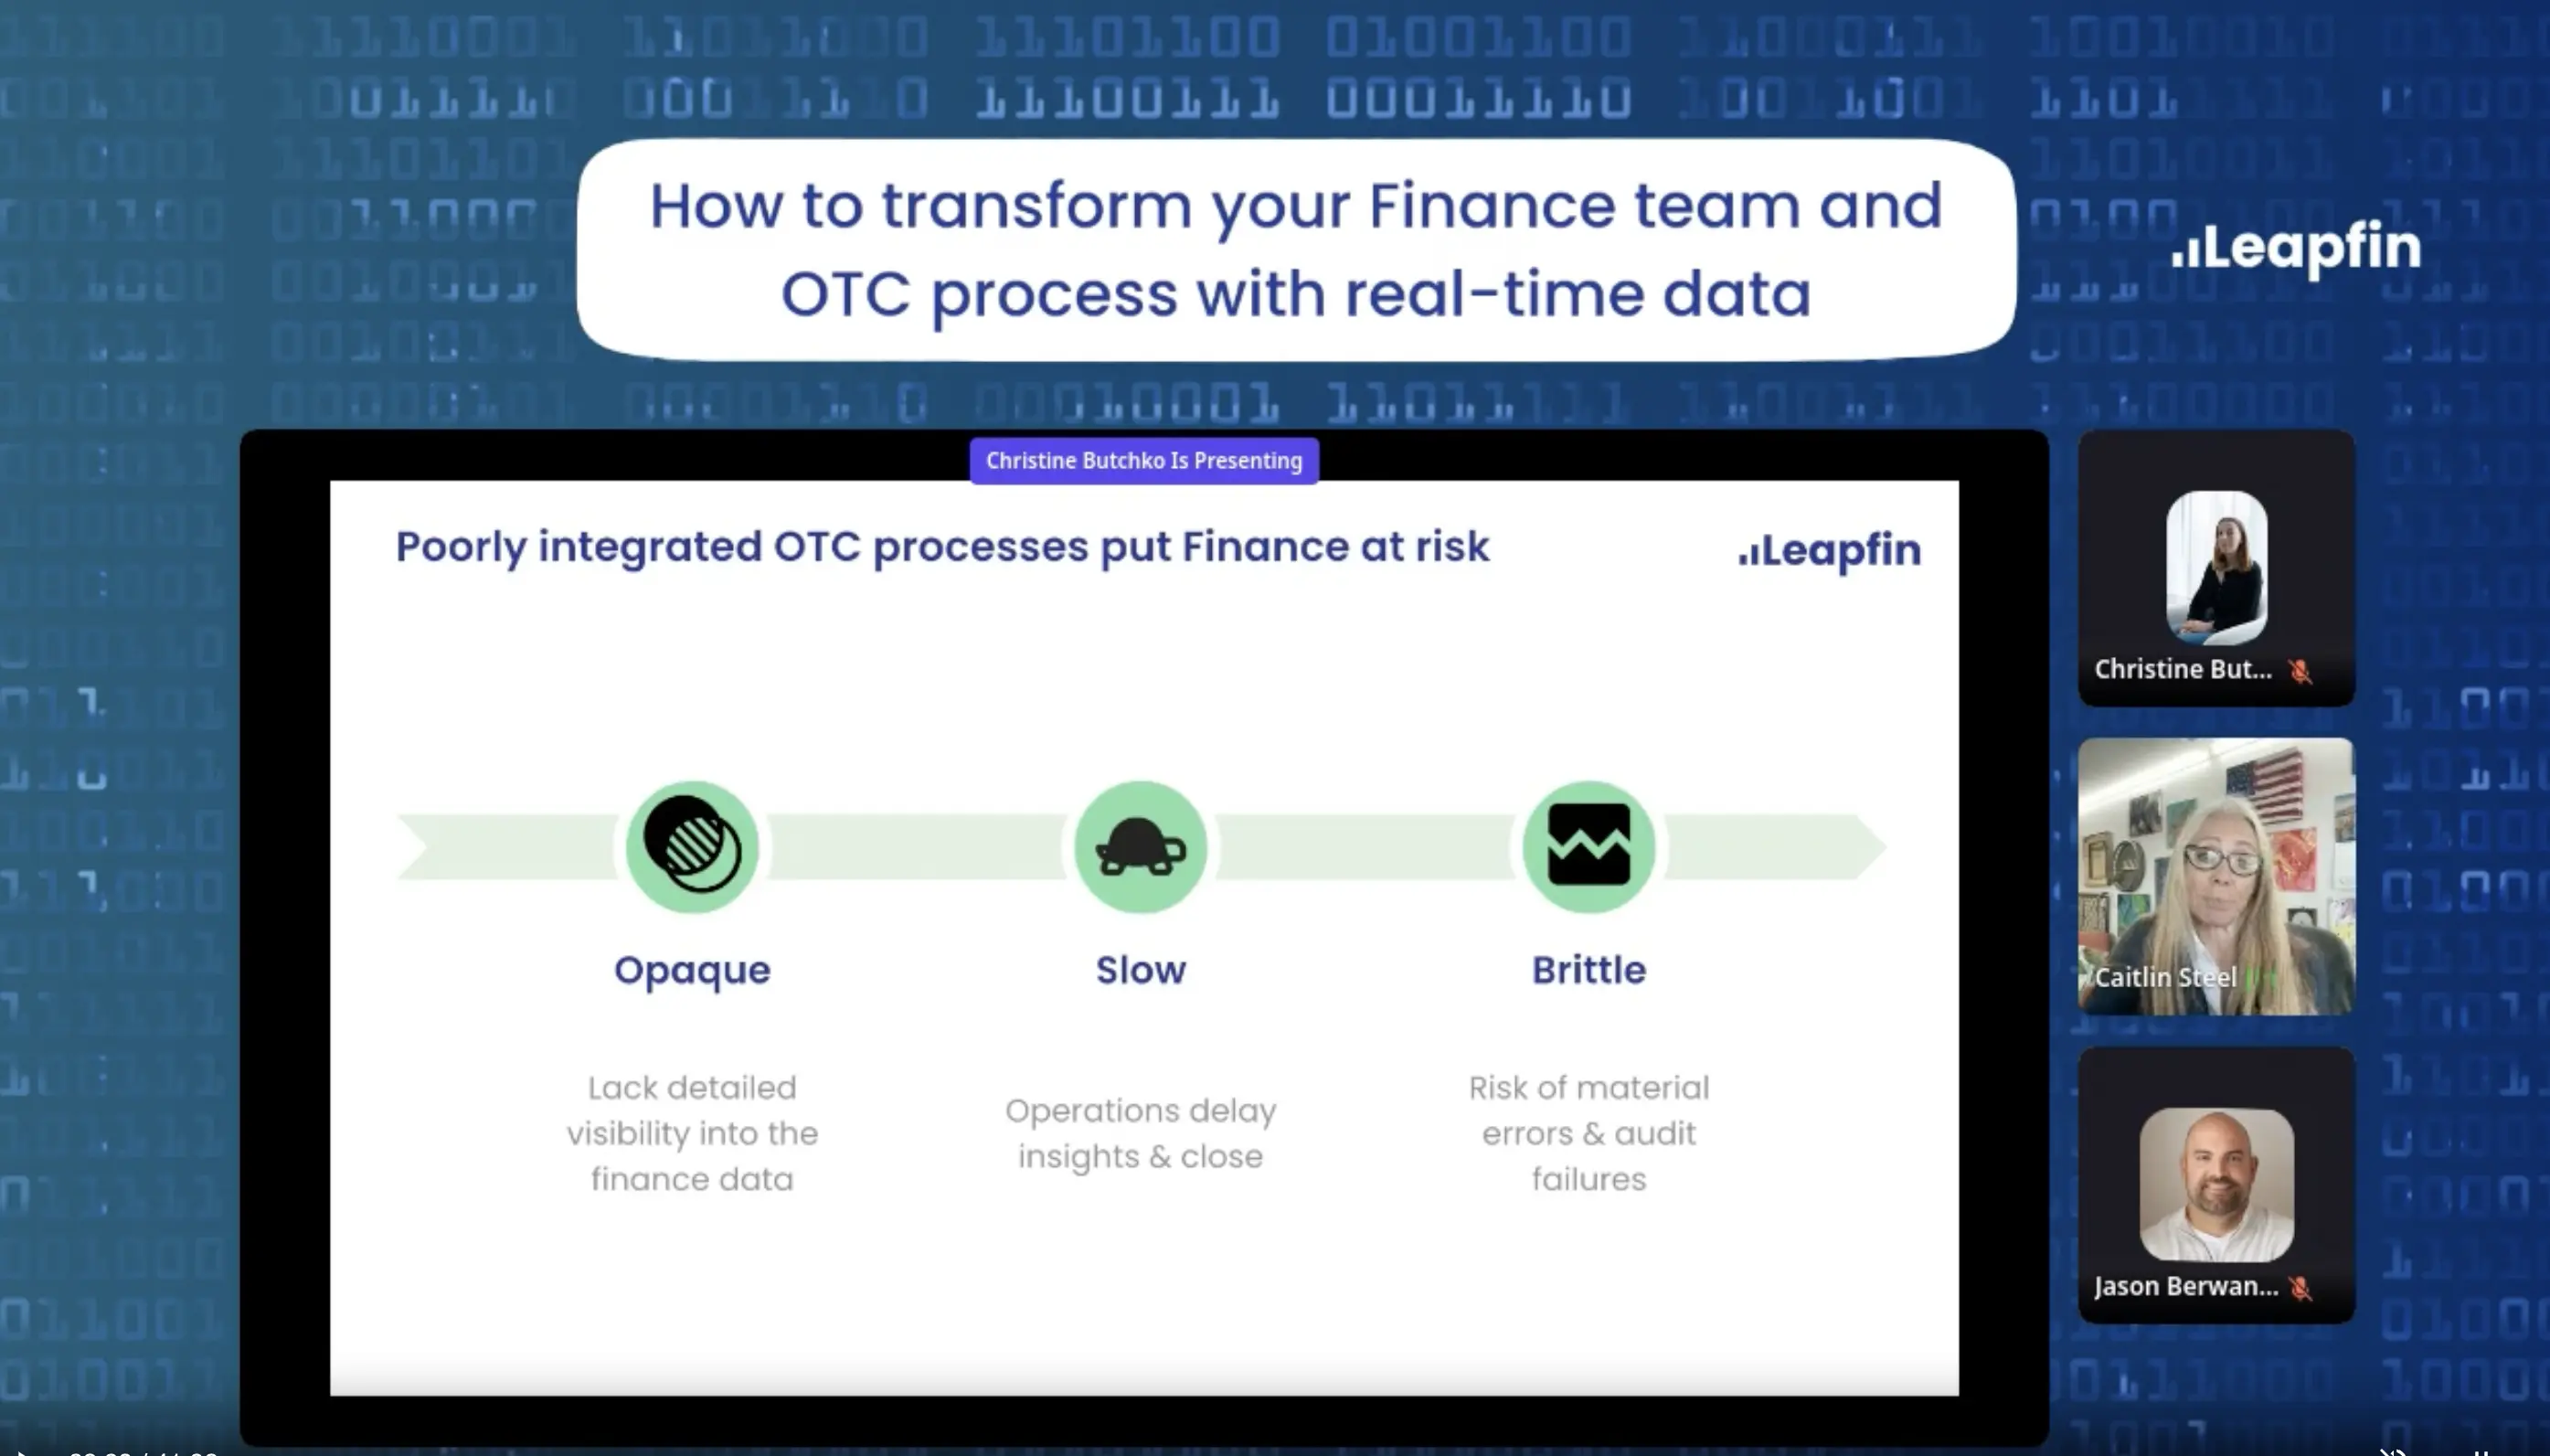 Transforming your Finance team and OTC process with real-time data